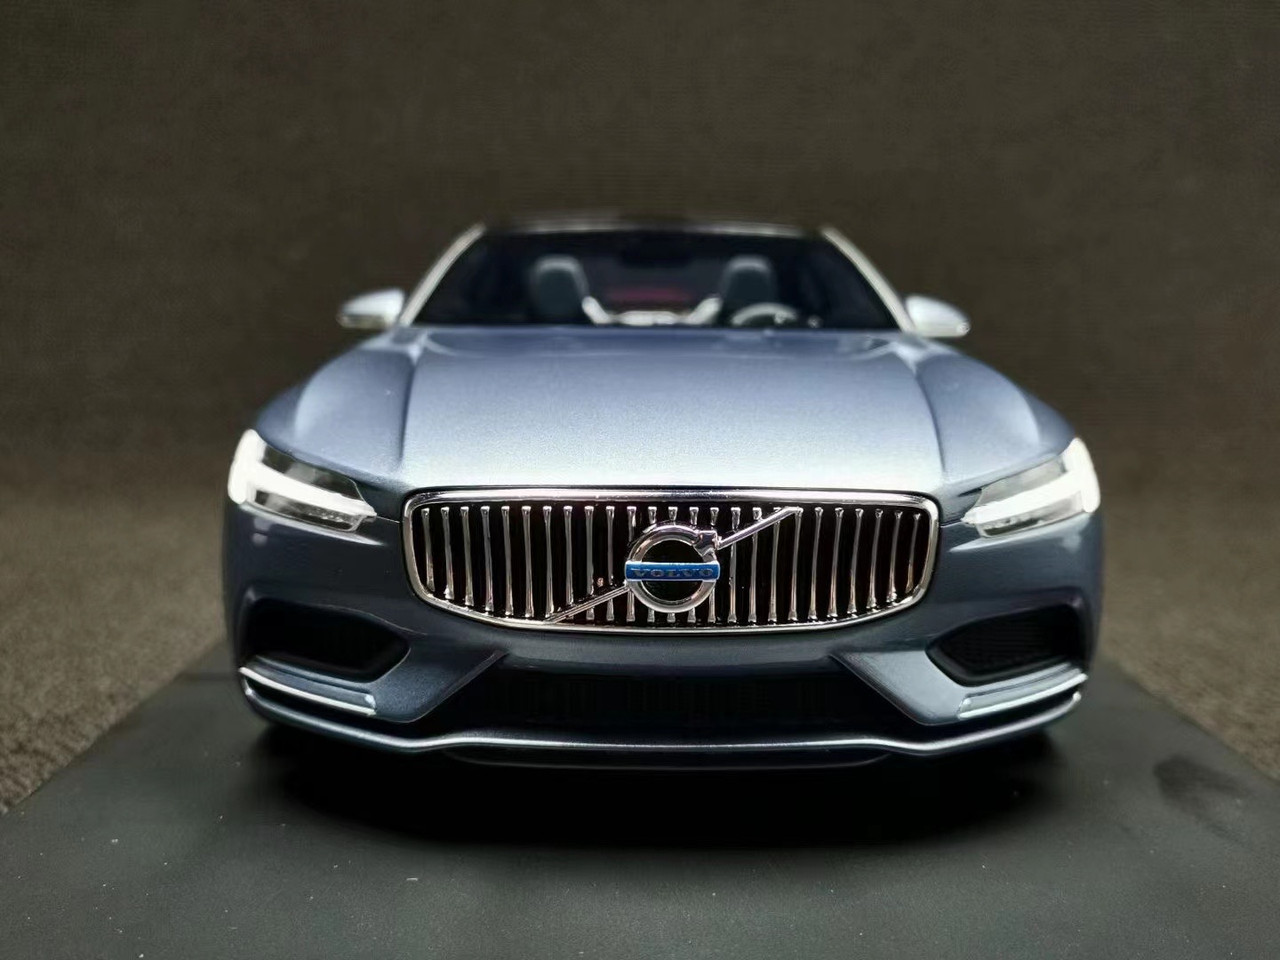 1/18 DNA Volvo Concept Coupe Resin Car Model